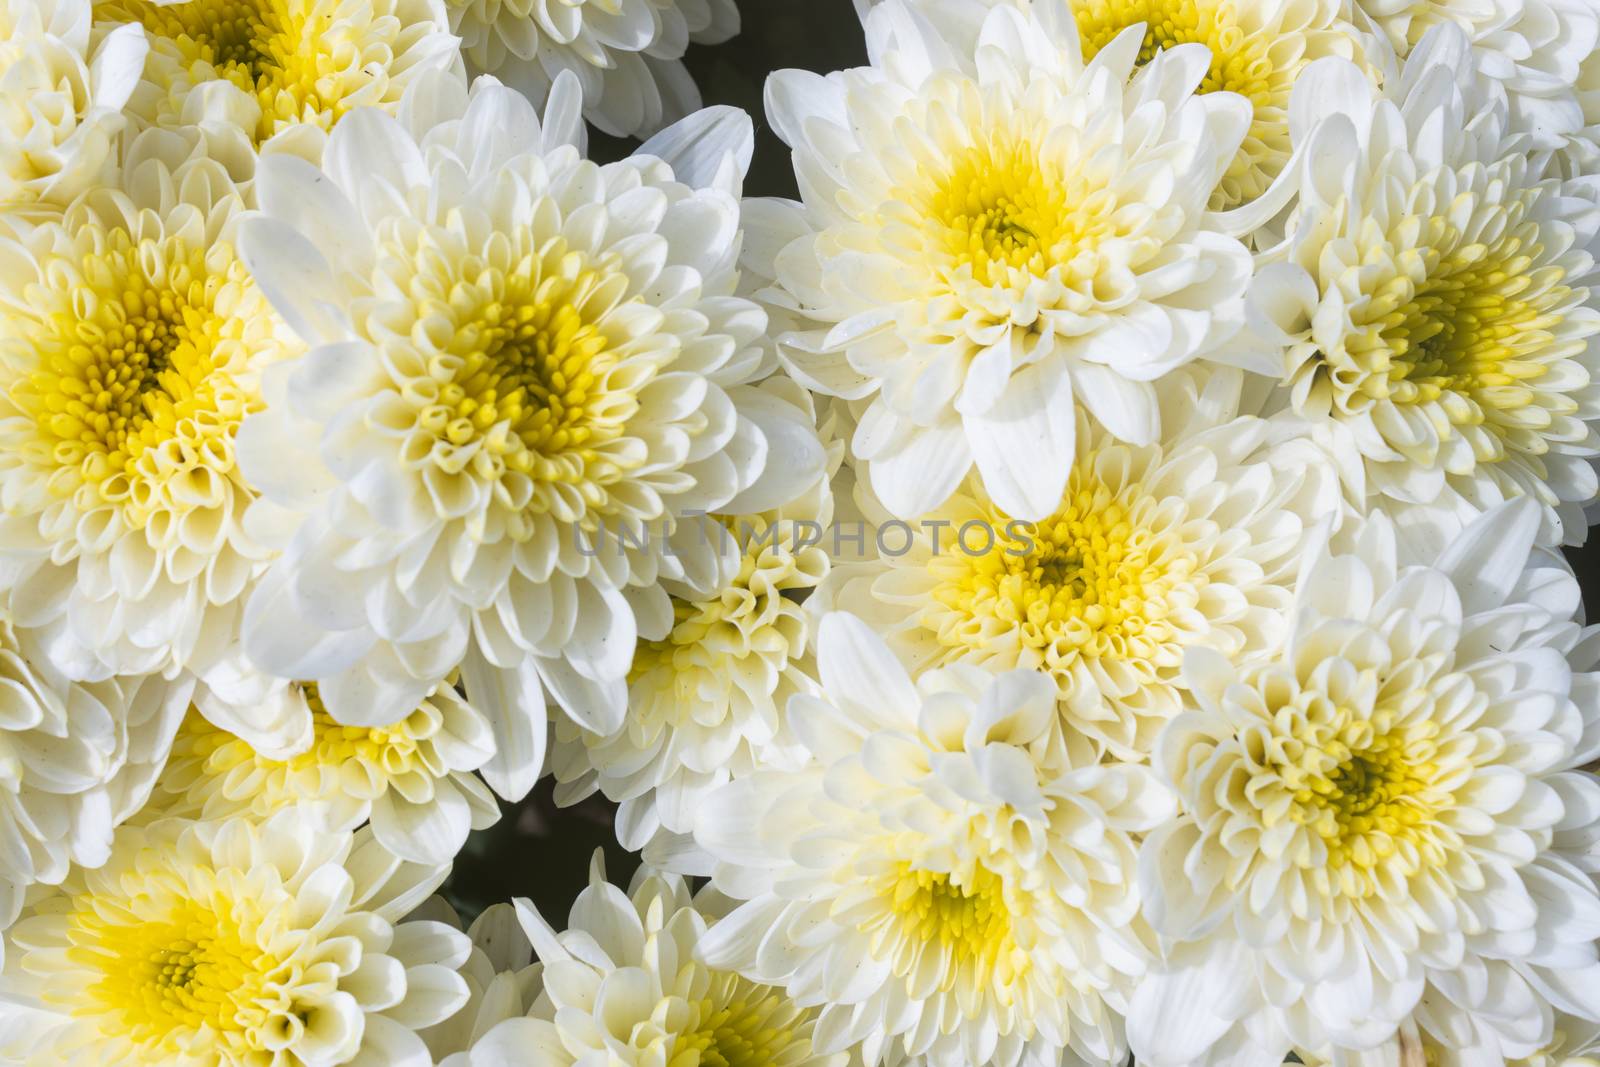 White Chrysanthemum or Mums Flowers in Garden with Natural Light by steafpong